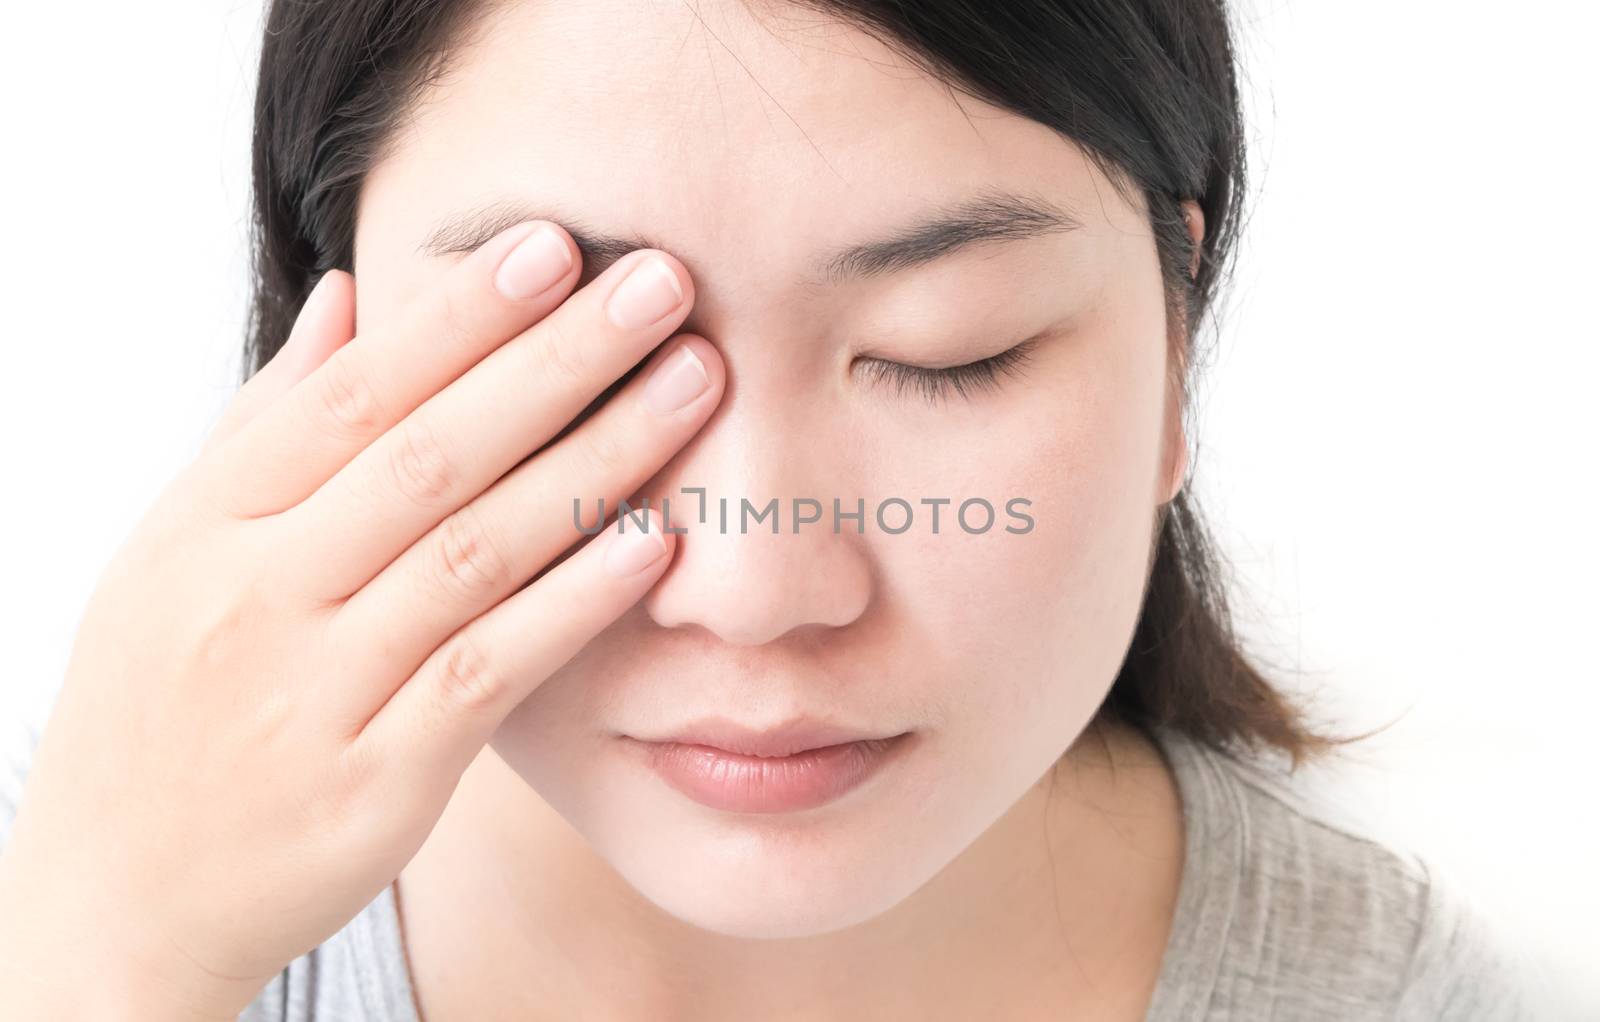 Woman hand closes eyes with eye pain, health care and medical concept